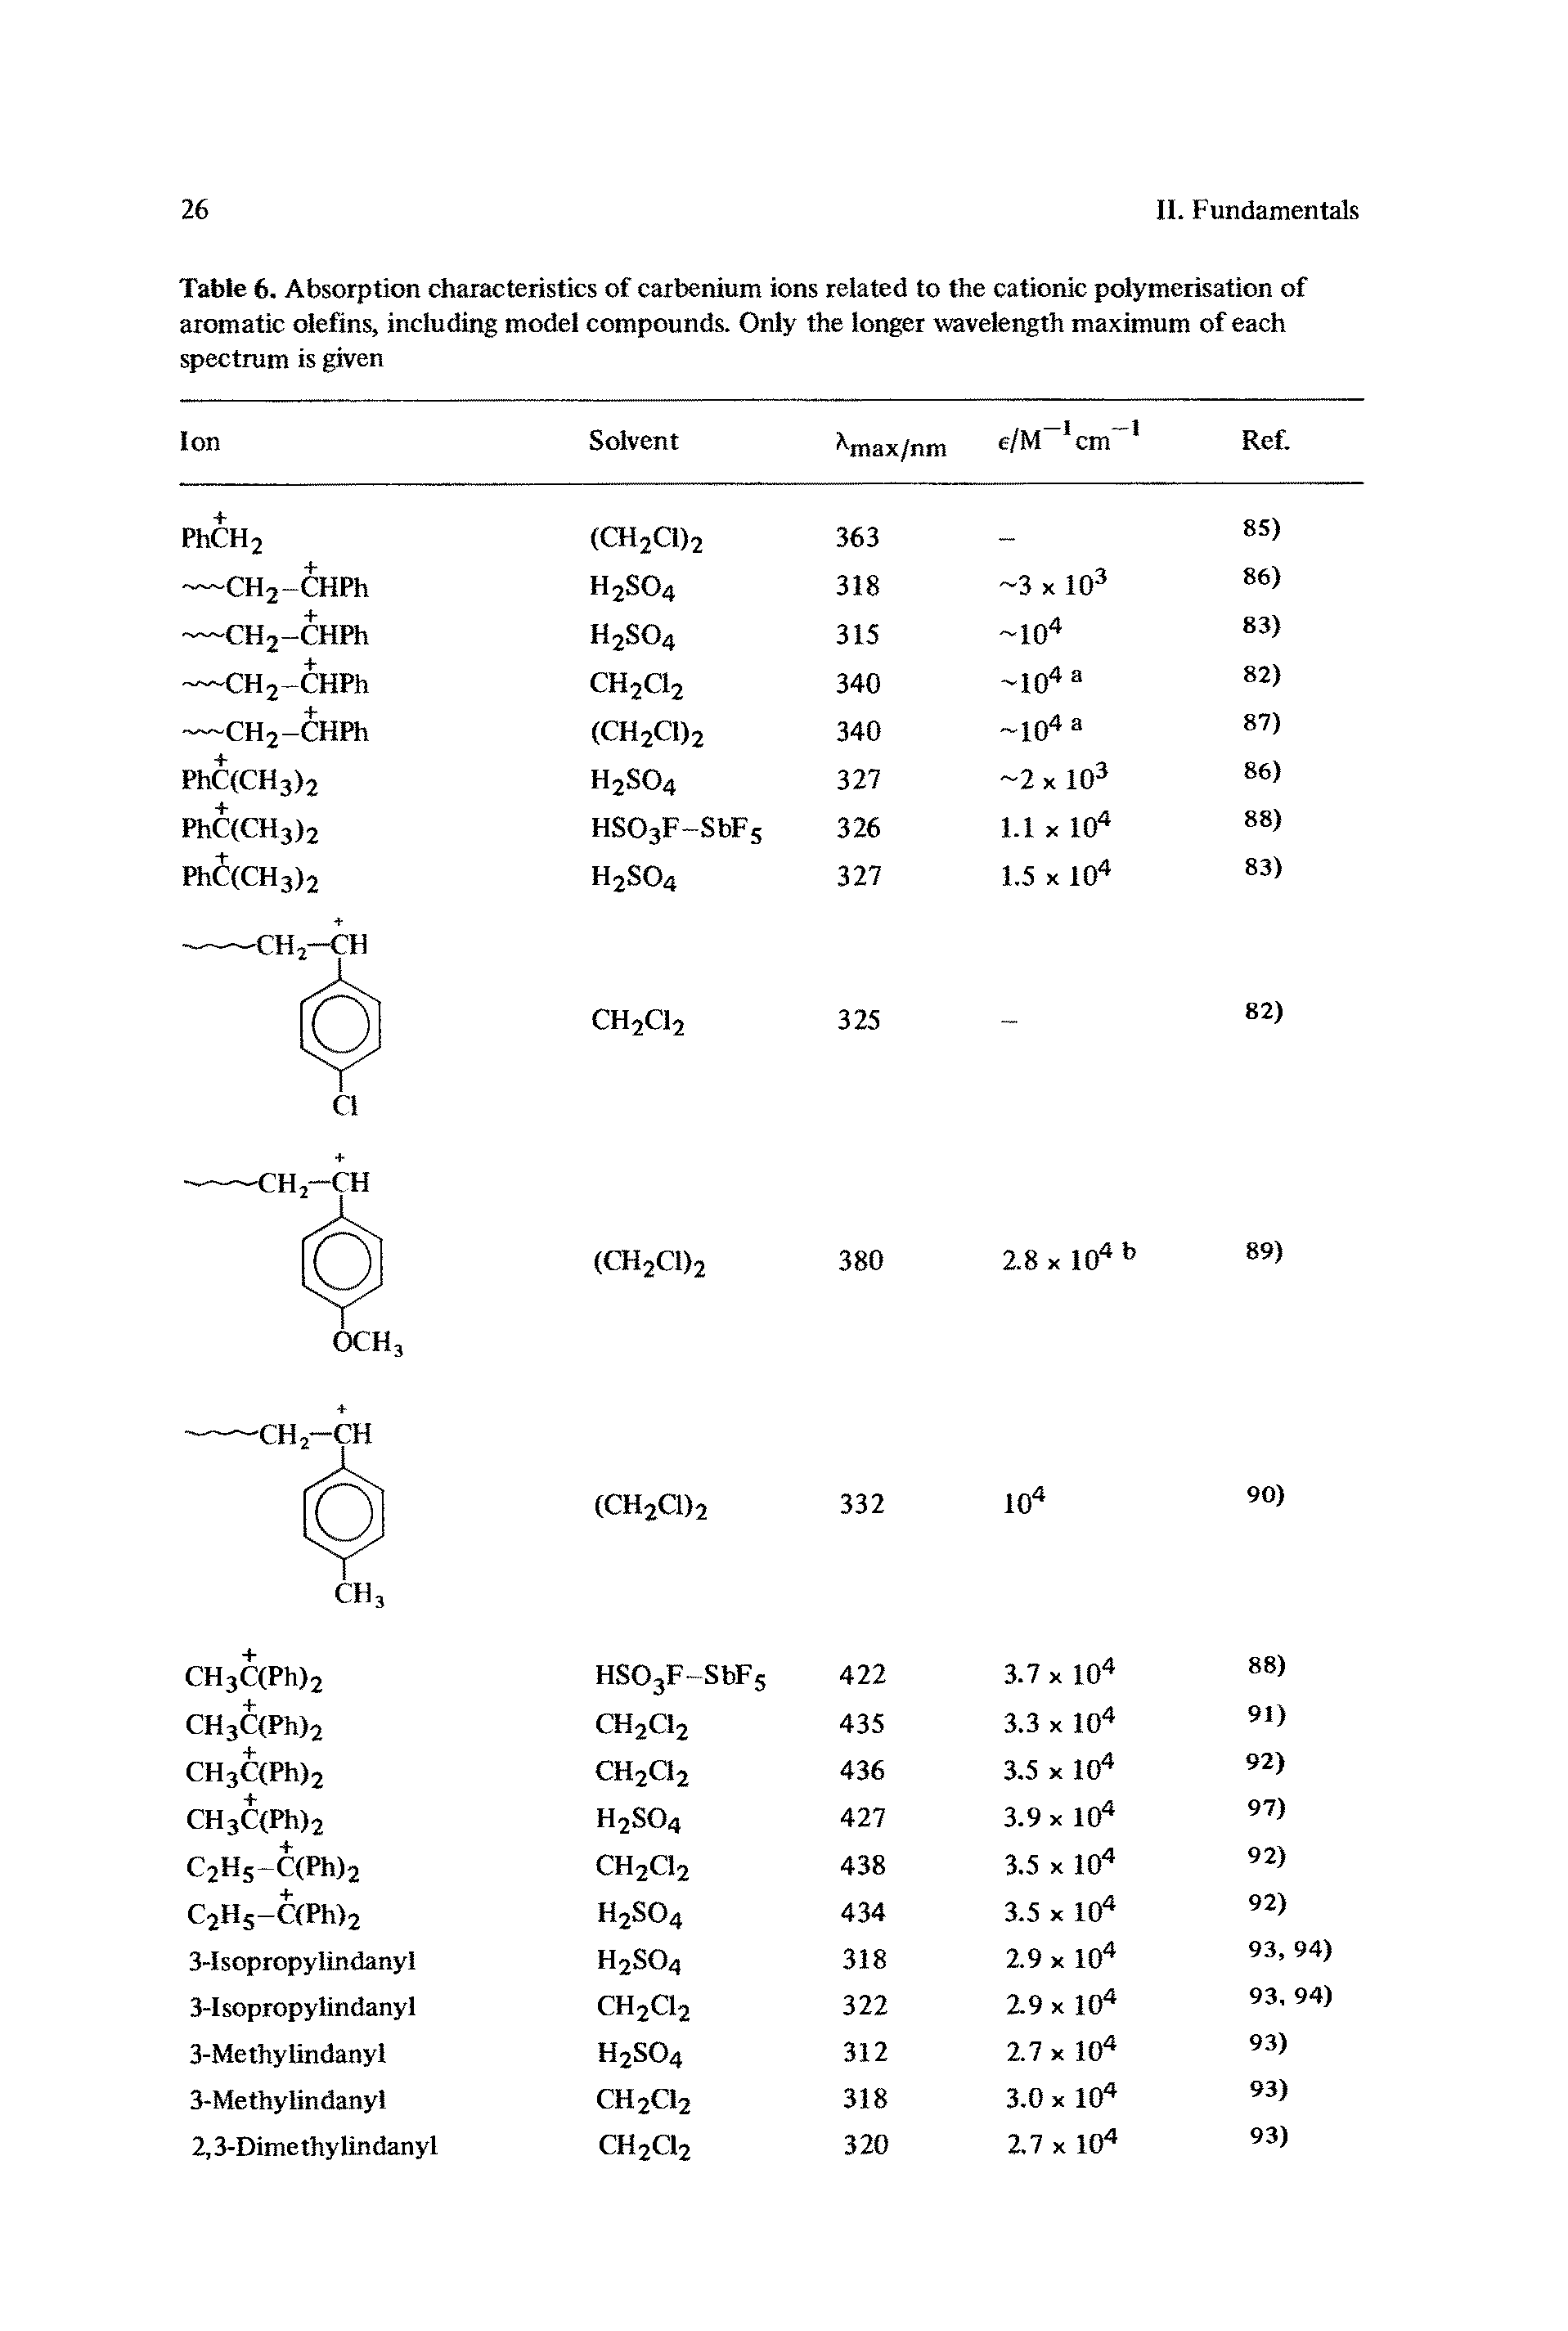 Table 6. Absorption characteristics of carbenium ions related to the cationic polymerisation of aromatic olefins, including model compounds. Only the longer wavelength maximum of each spectrum is given...